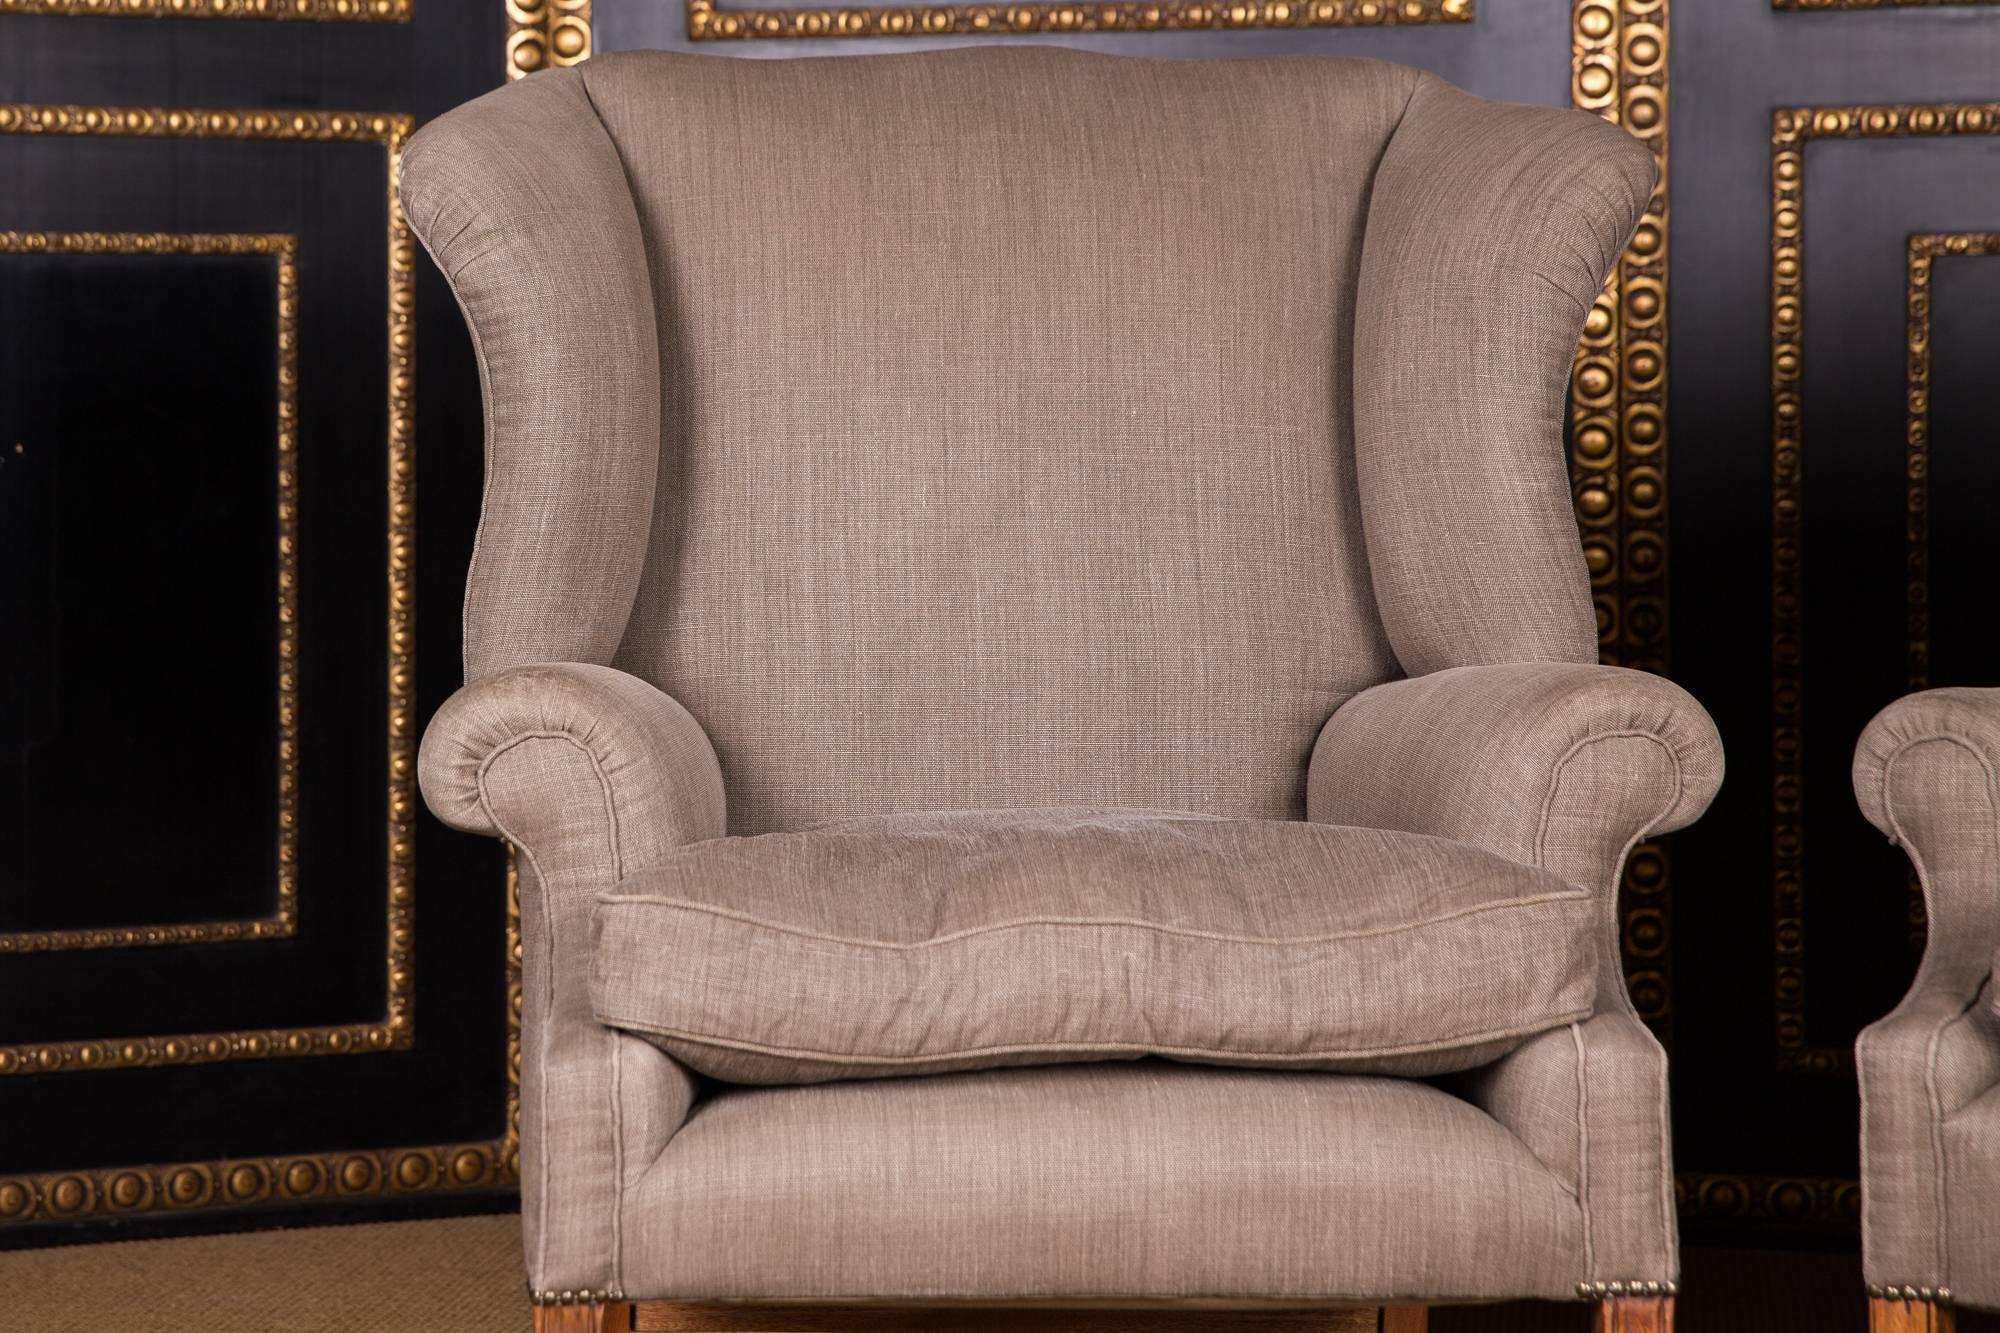 Straight frame on straight legs. Short supports for cambered armrests. High-backed backrest frame. Laterally slightly curved armrests. High quality original classic upholstery with fine linen fabric.

The fabric cover is as new. A timeless